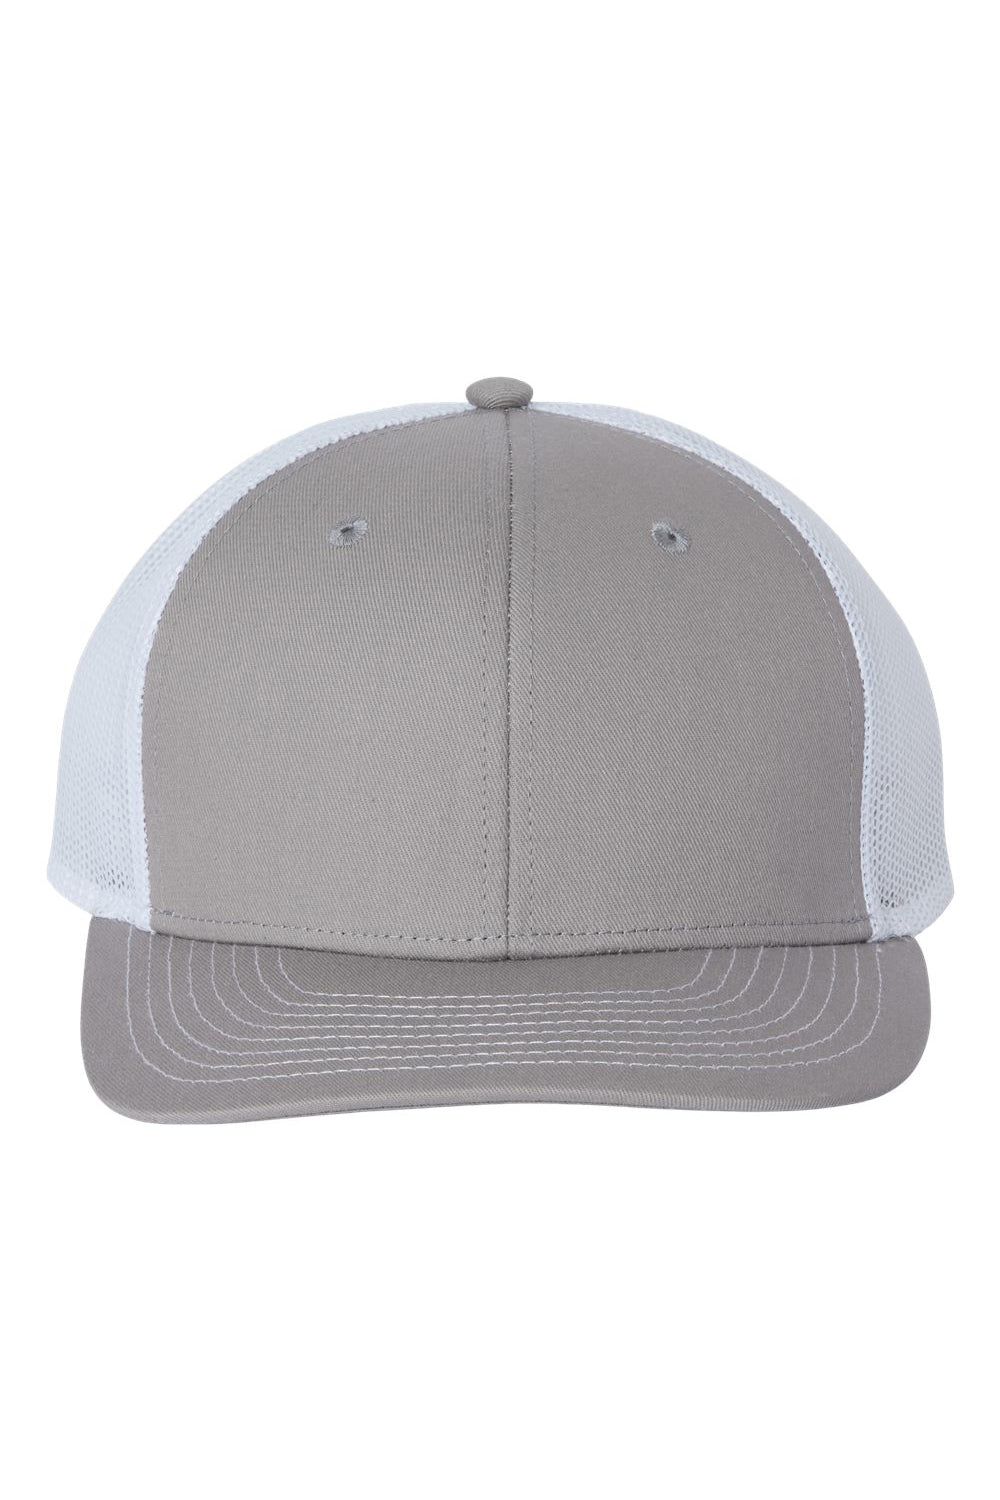 The Game GB452E Mens Everyday Trucker Hat Grey/White Flat Front